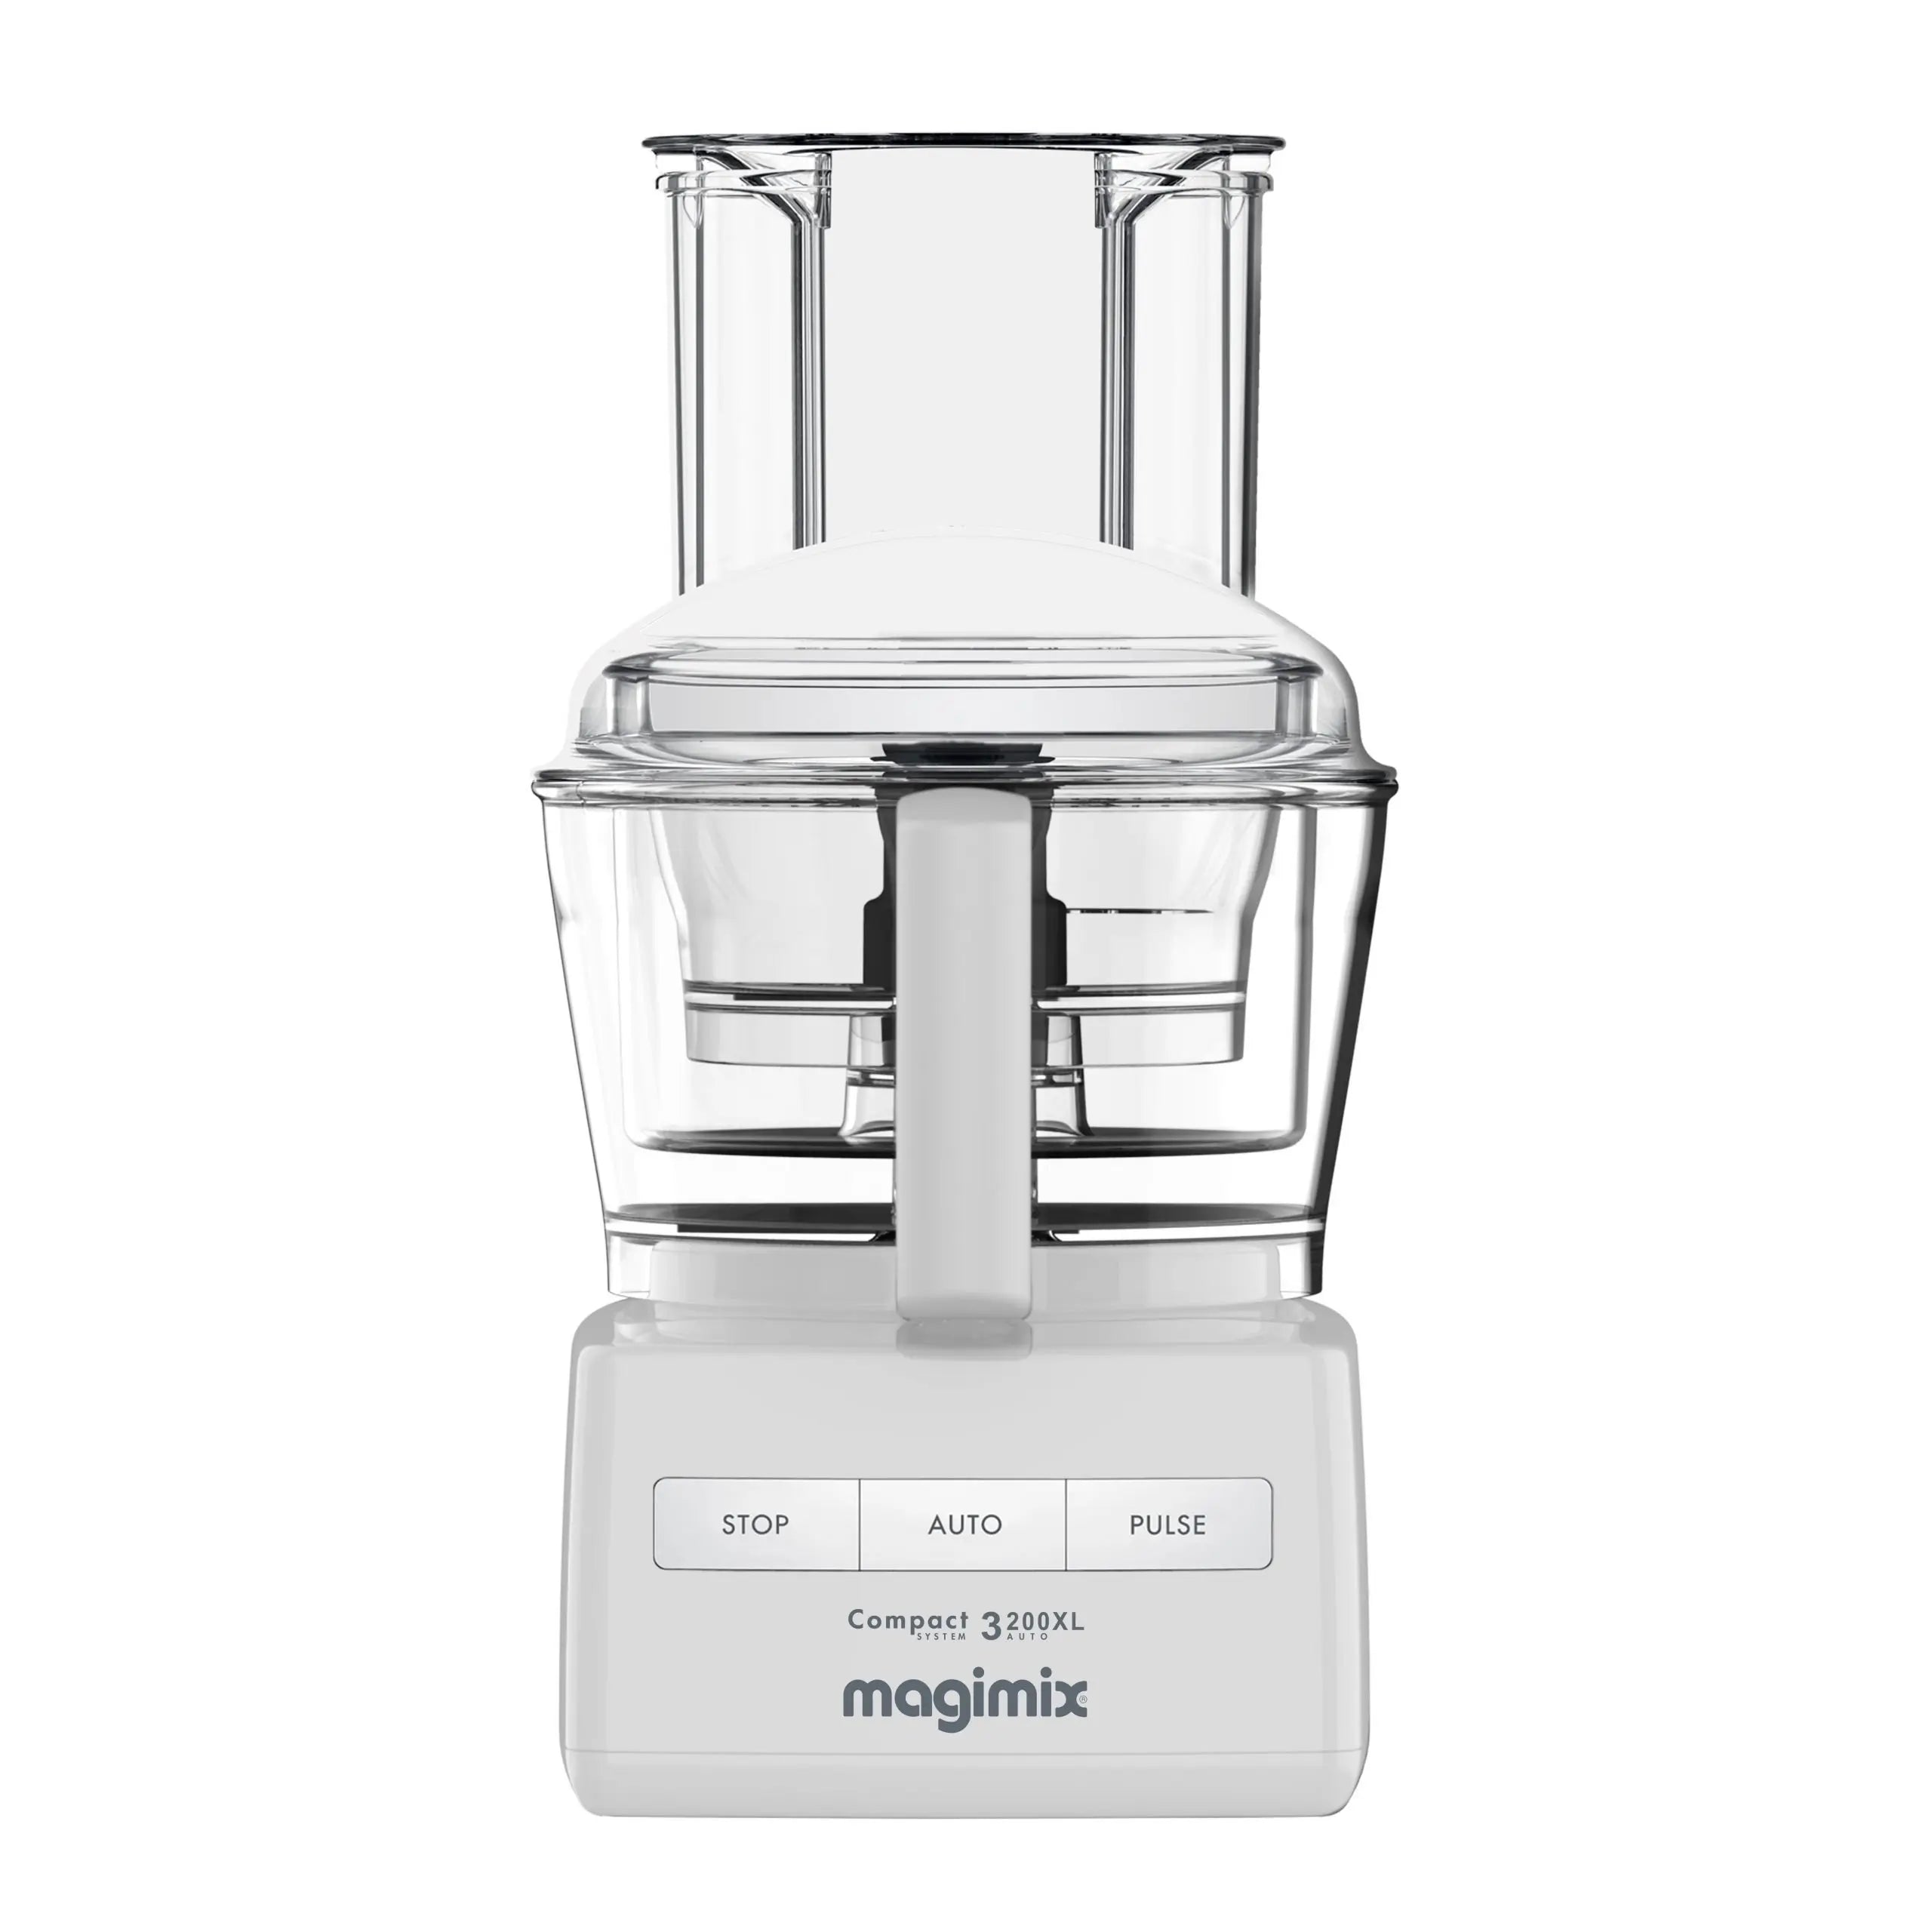 Magimix by Robot-Coupe 3200XL, 12-Cup Food Processor: Free Shipping